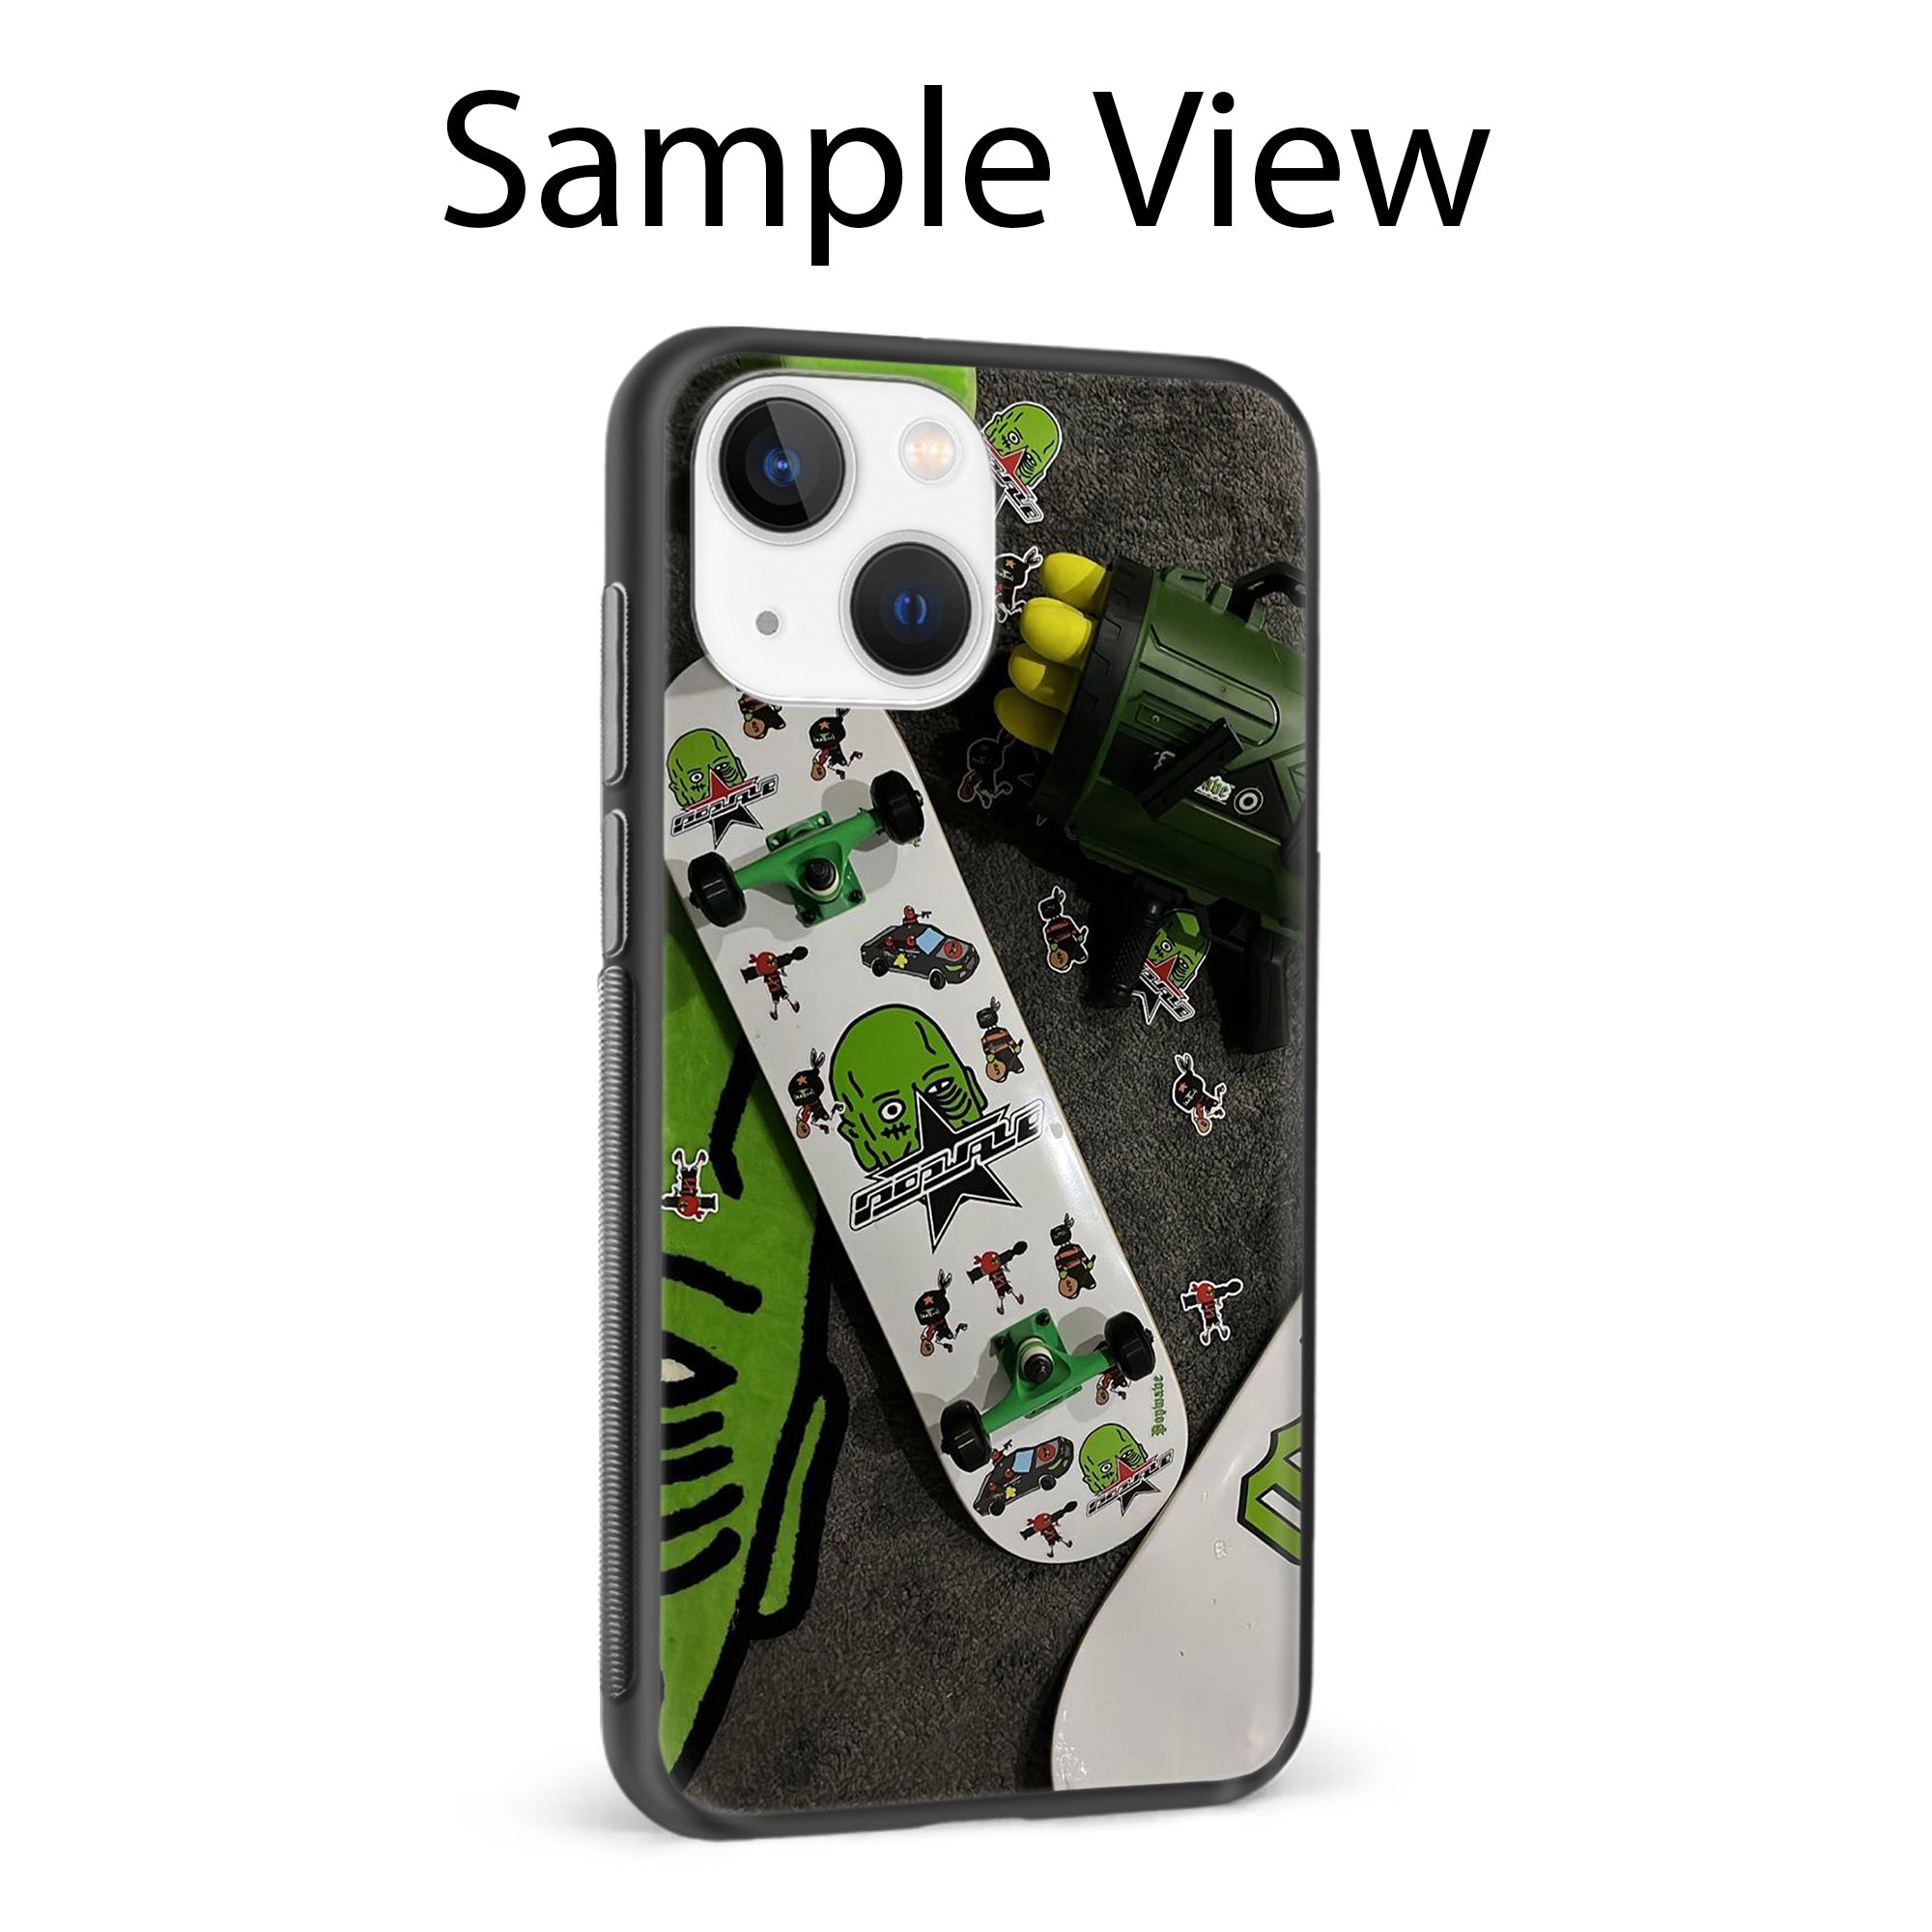 Buy Hulk Skateboard Metal-Silicon Back Mobile Phone Case/Cover For Samsung Galaxy A12 Online